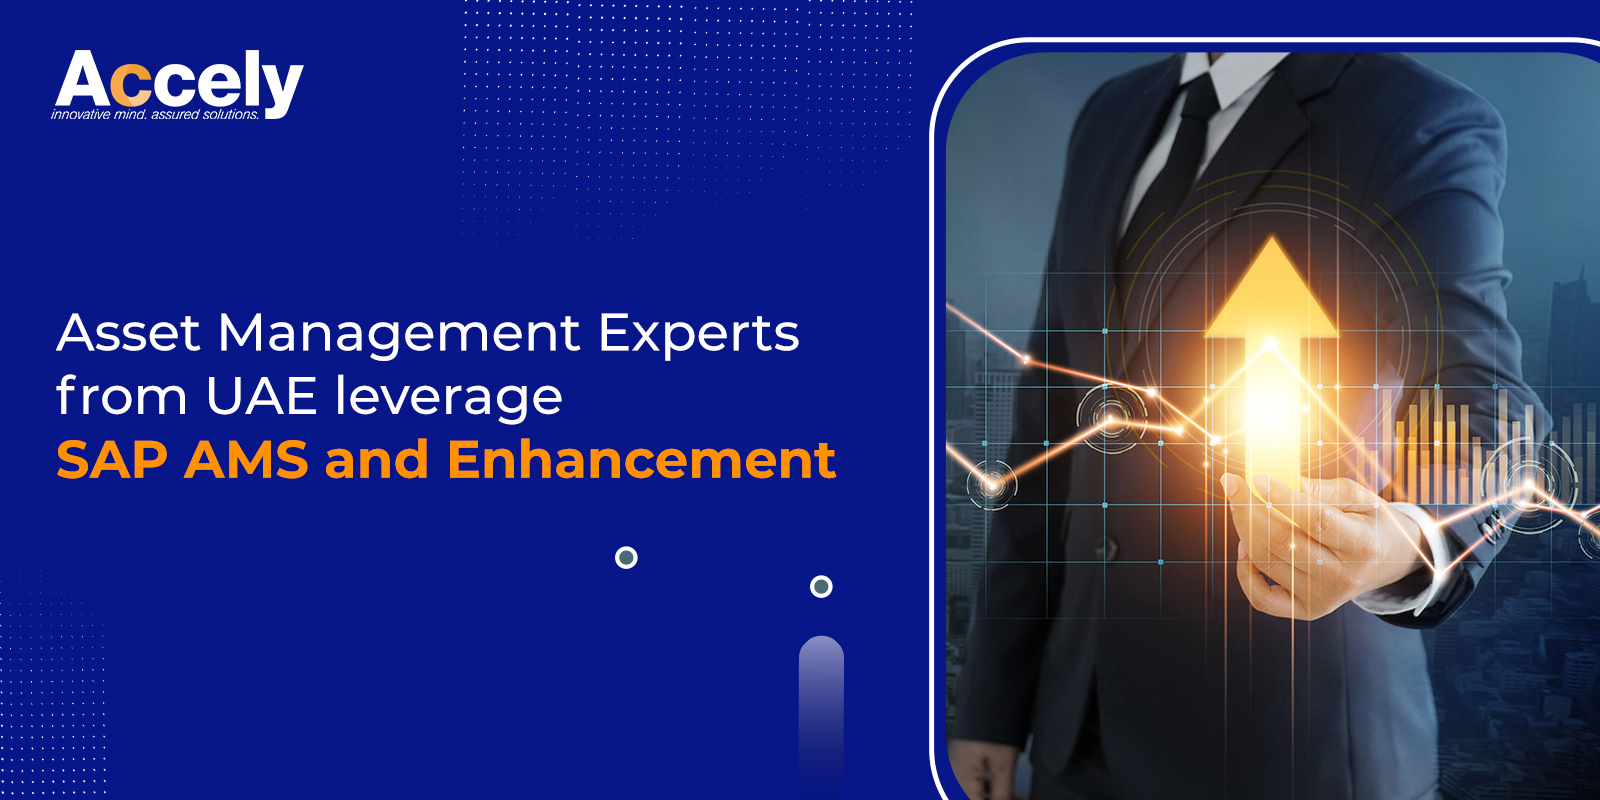 Asset Management Experts from UAE leverage SAP AMS and Enhancement